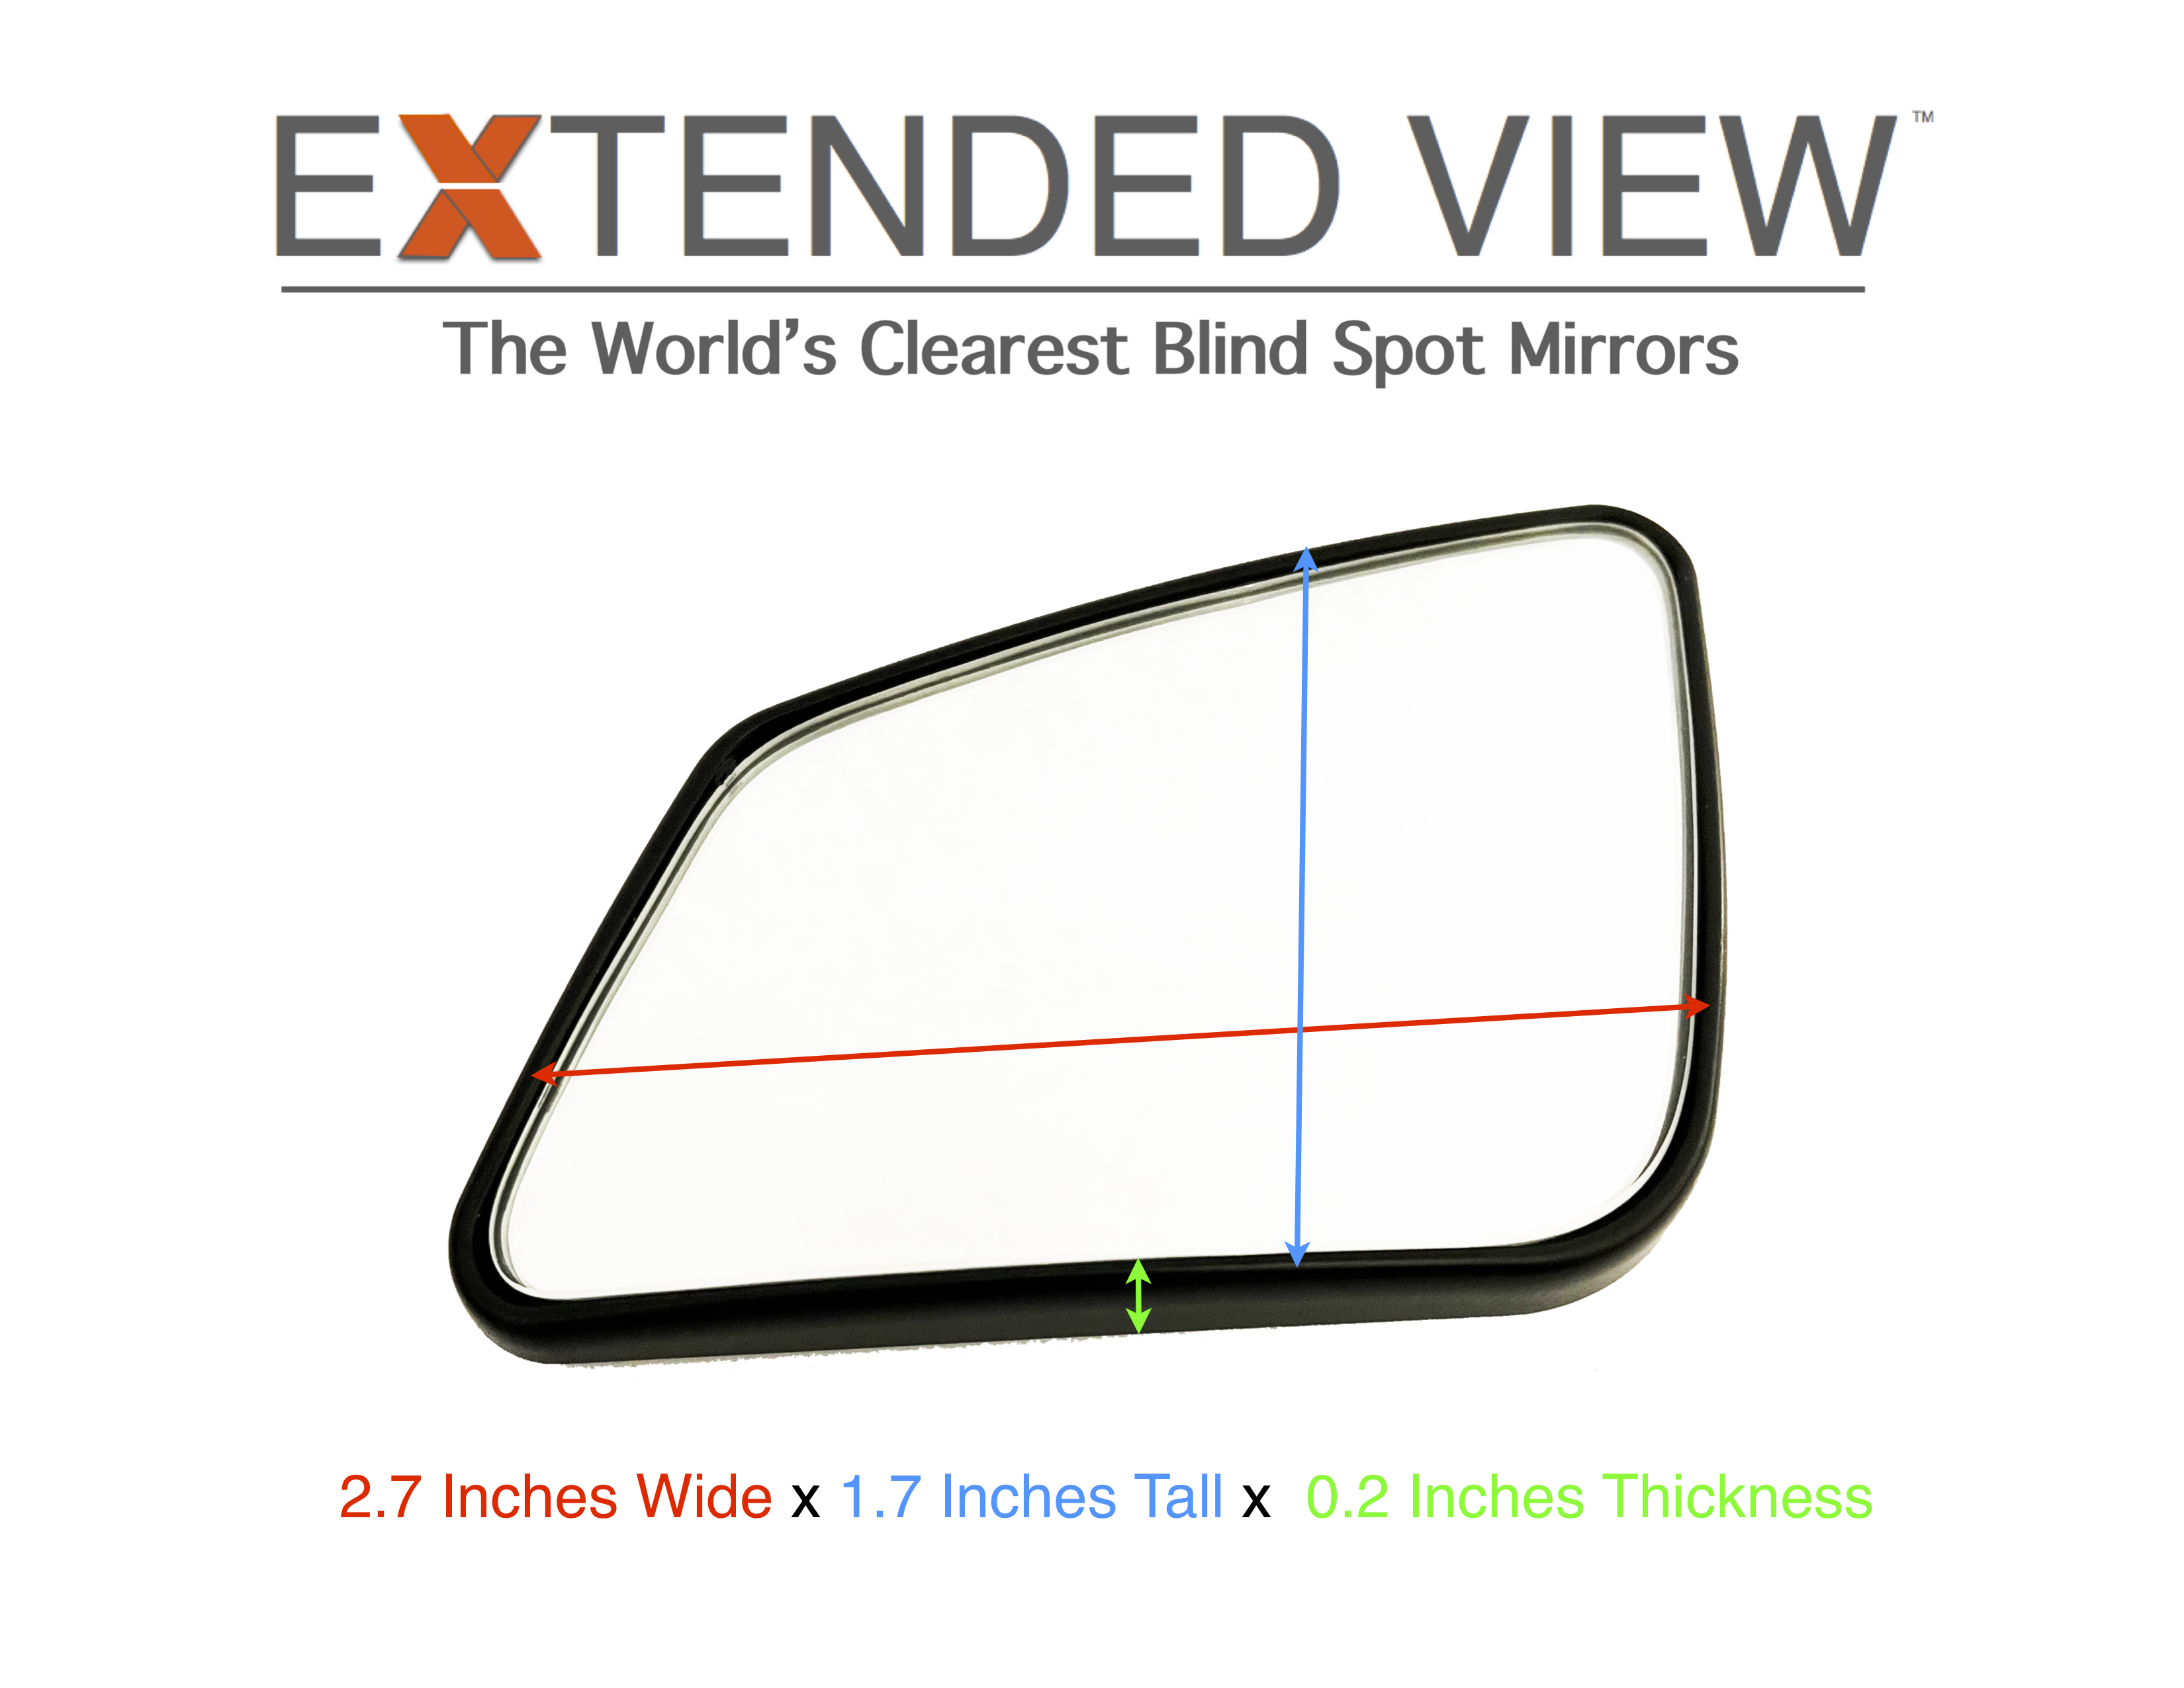 BMW 6 Series Blind Spot Mirrors | F06 Extended View™